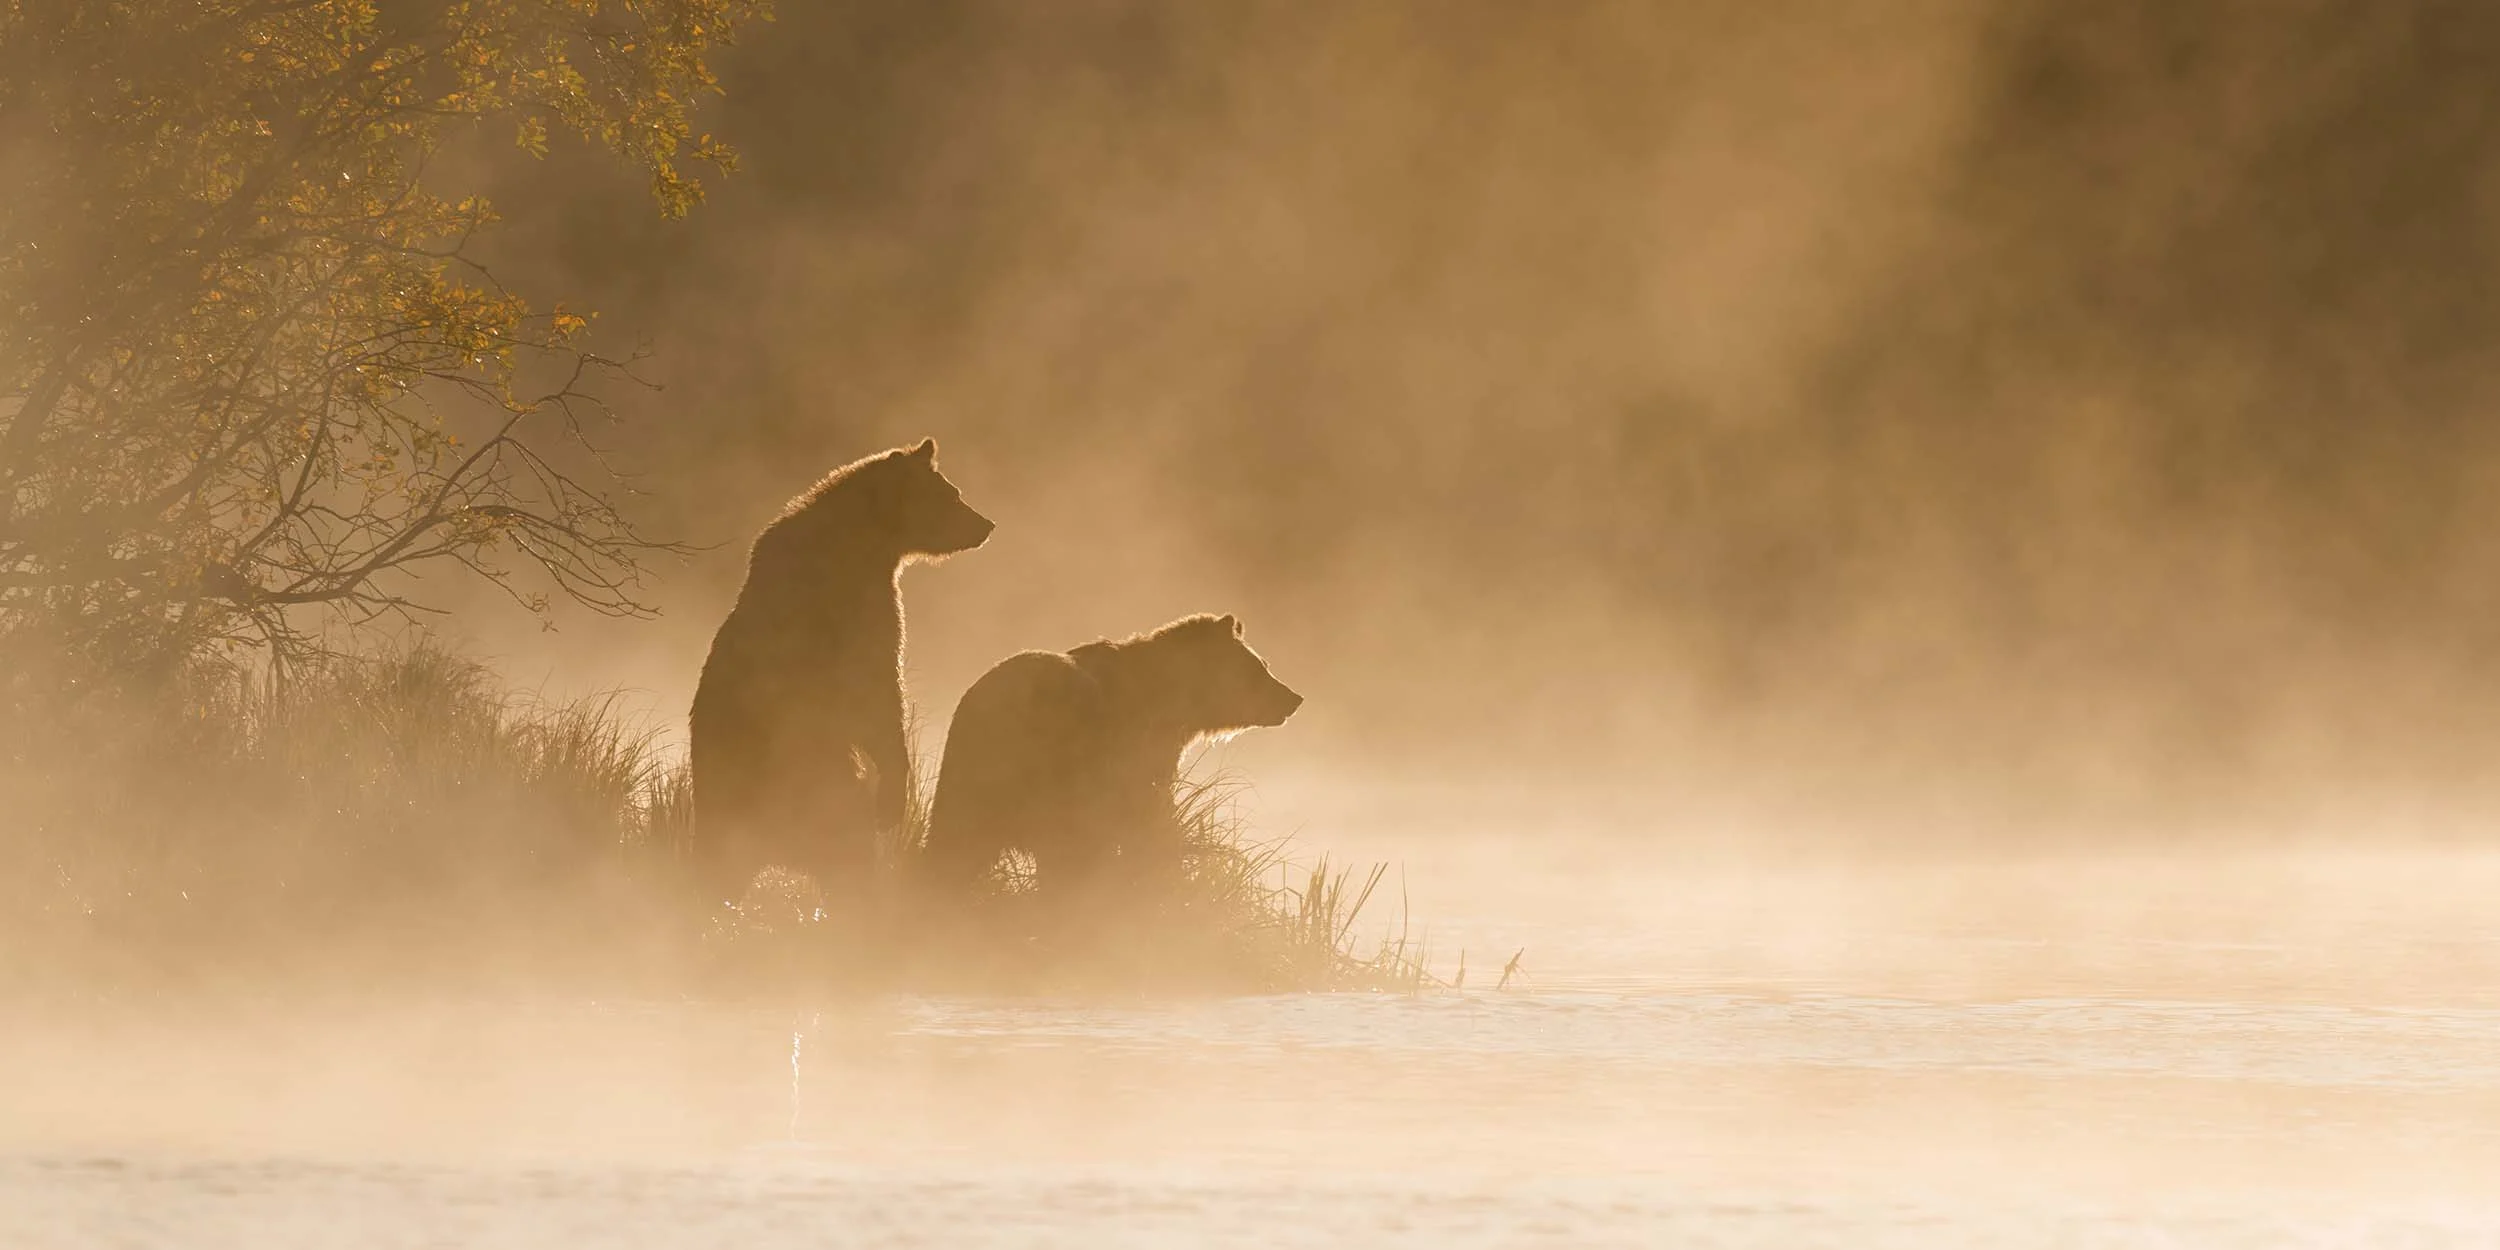 Grizzly Bear in Autumn - Photo: Shutterstock